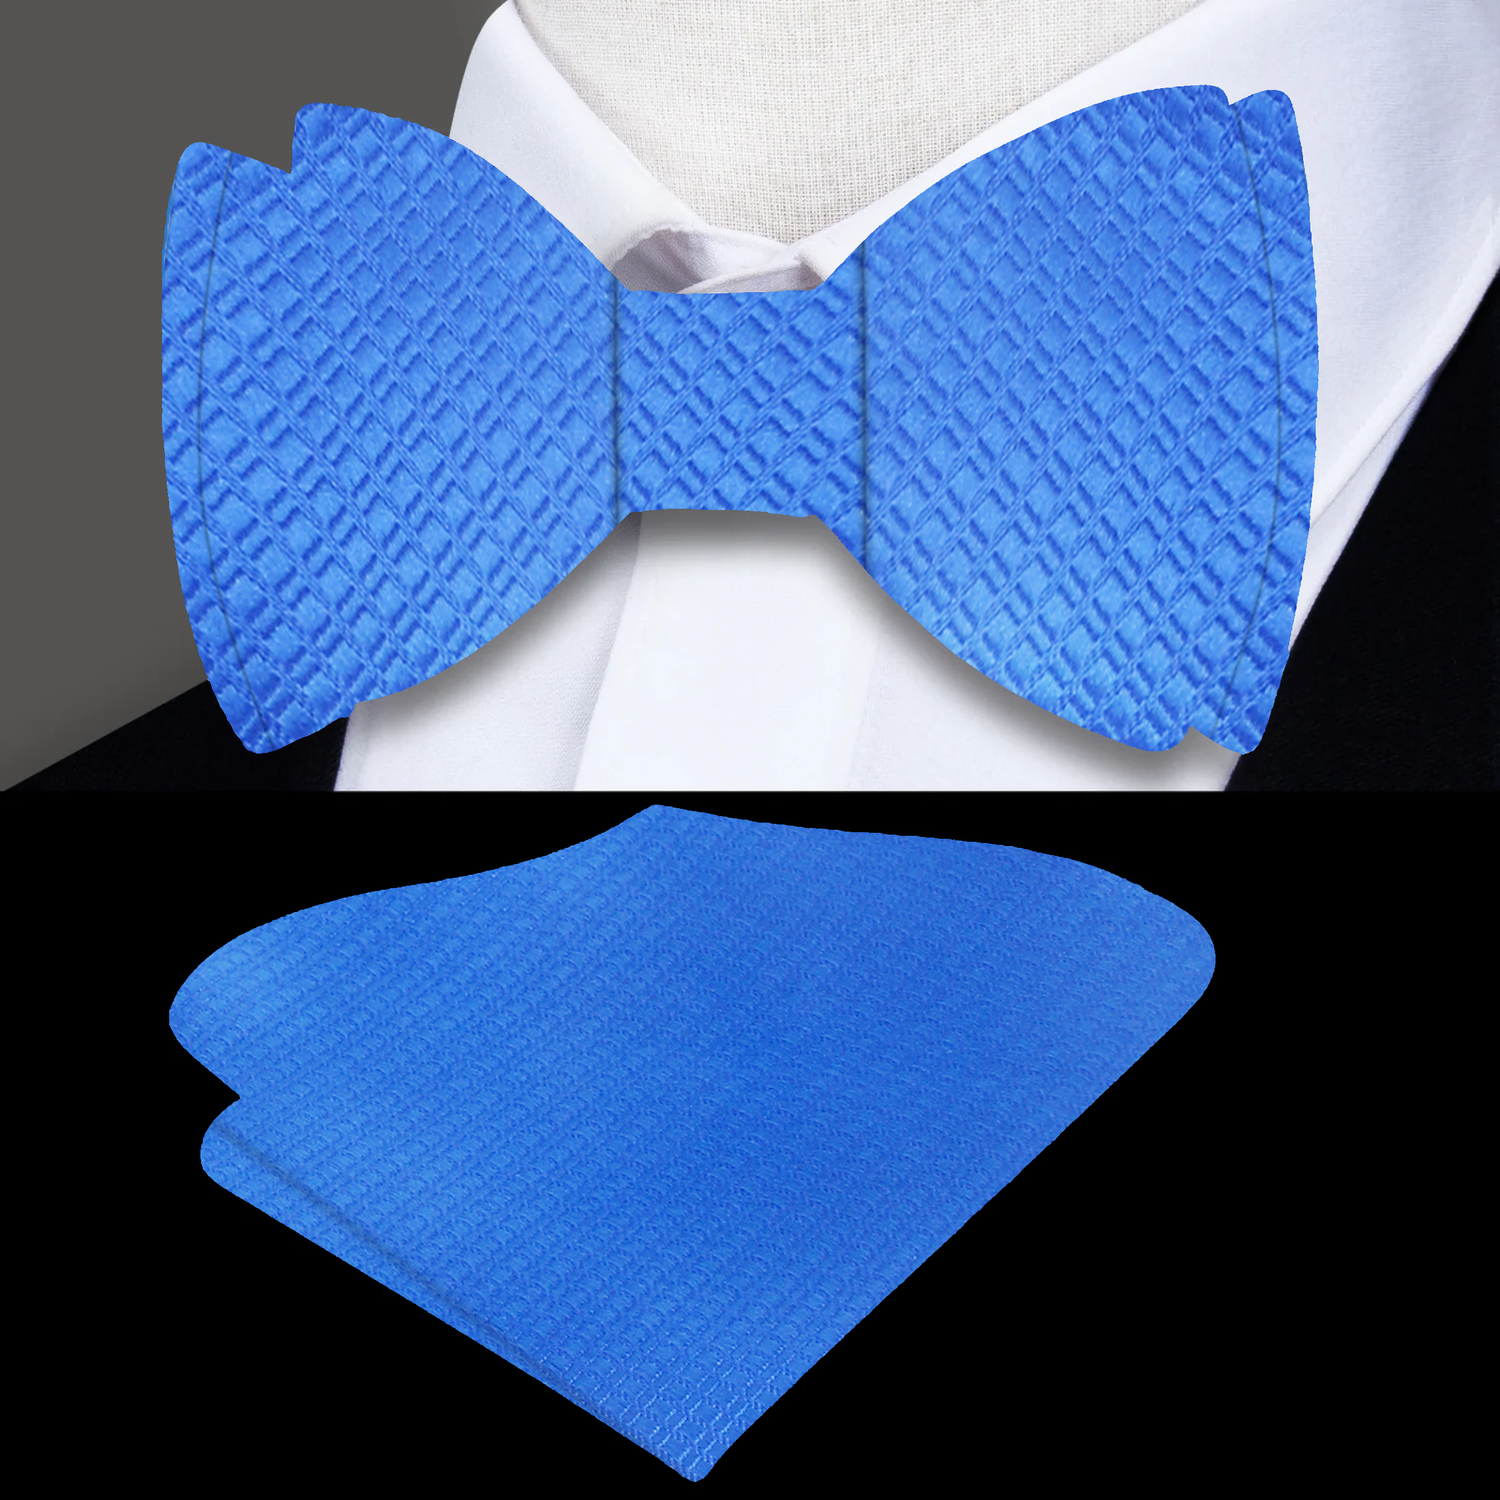 Main: A Solid Royal Blue With Small Check Texture Pattern Silk Self Tie Bow Tie With Matching Pocket Square